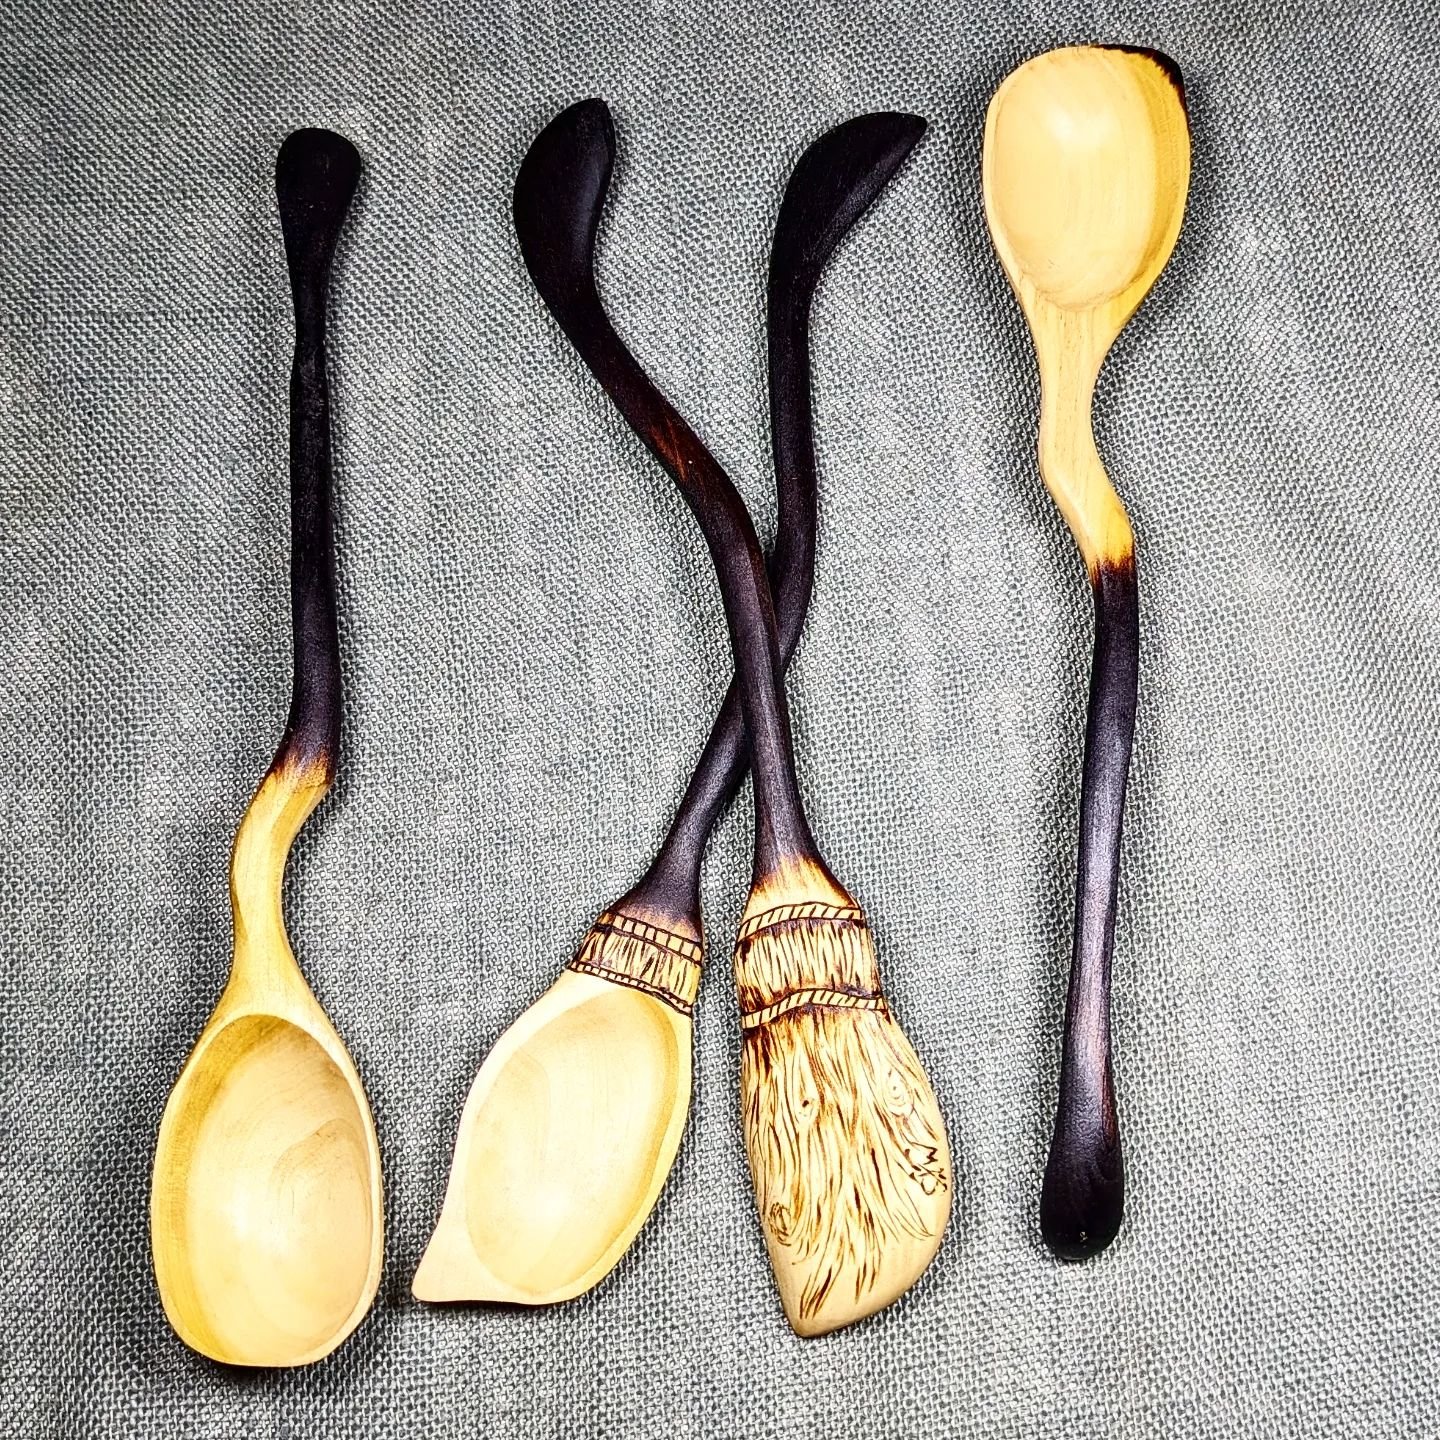 New spoons! Getting excited for the up coming @austinwitchfest April 28 at Palmer Event Center. Get out and support local witches, artists, and vendors. 

#austinwitches #shopsmall #shoplocal #witch #handmade #austinwitchfest #smallbusiness